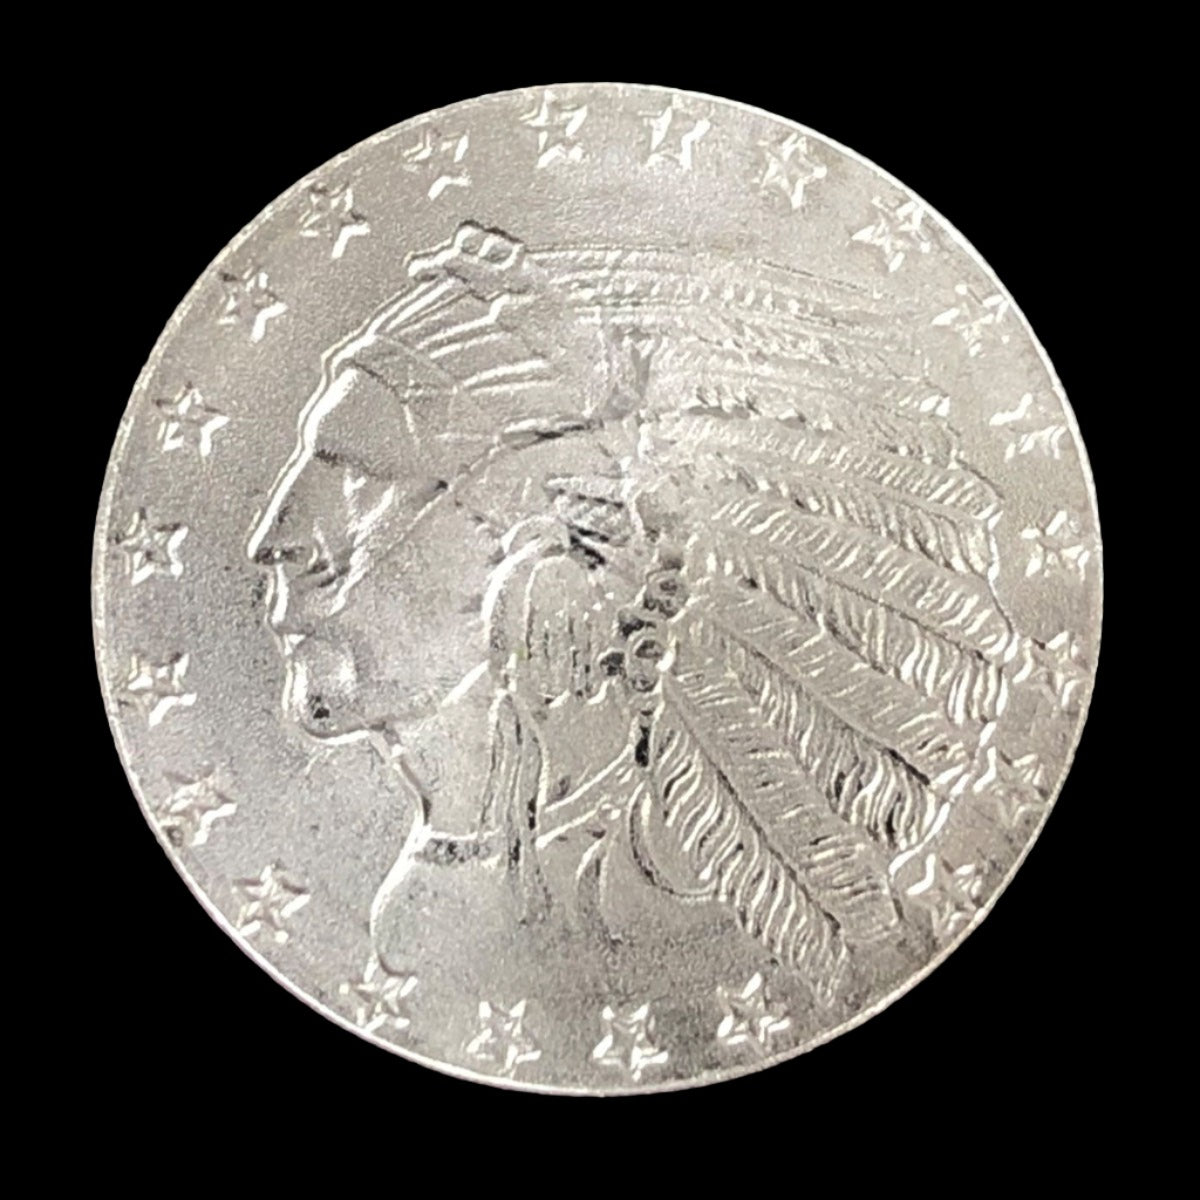 1/10 oz Silver Rounds (Secondary)